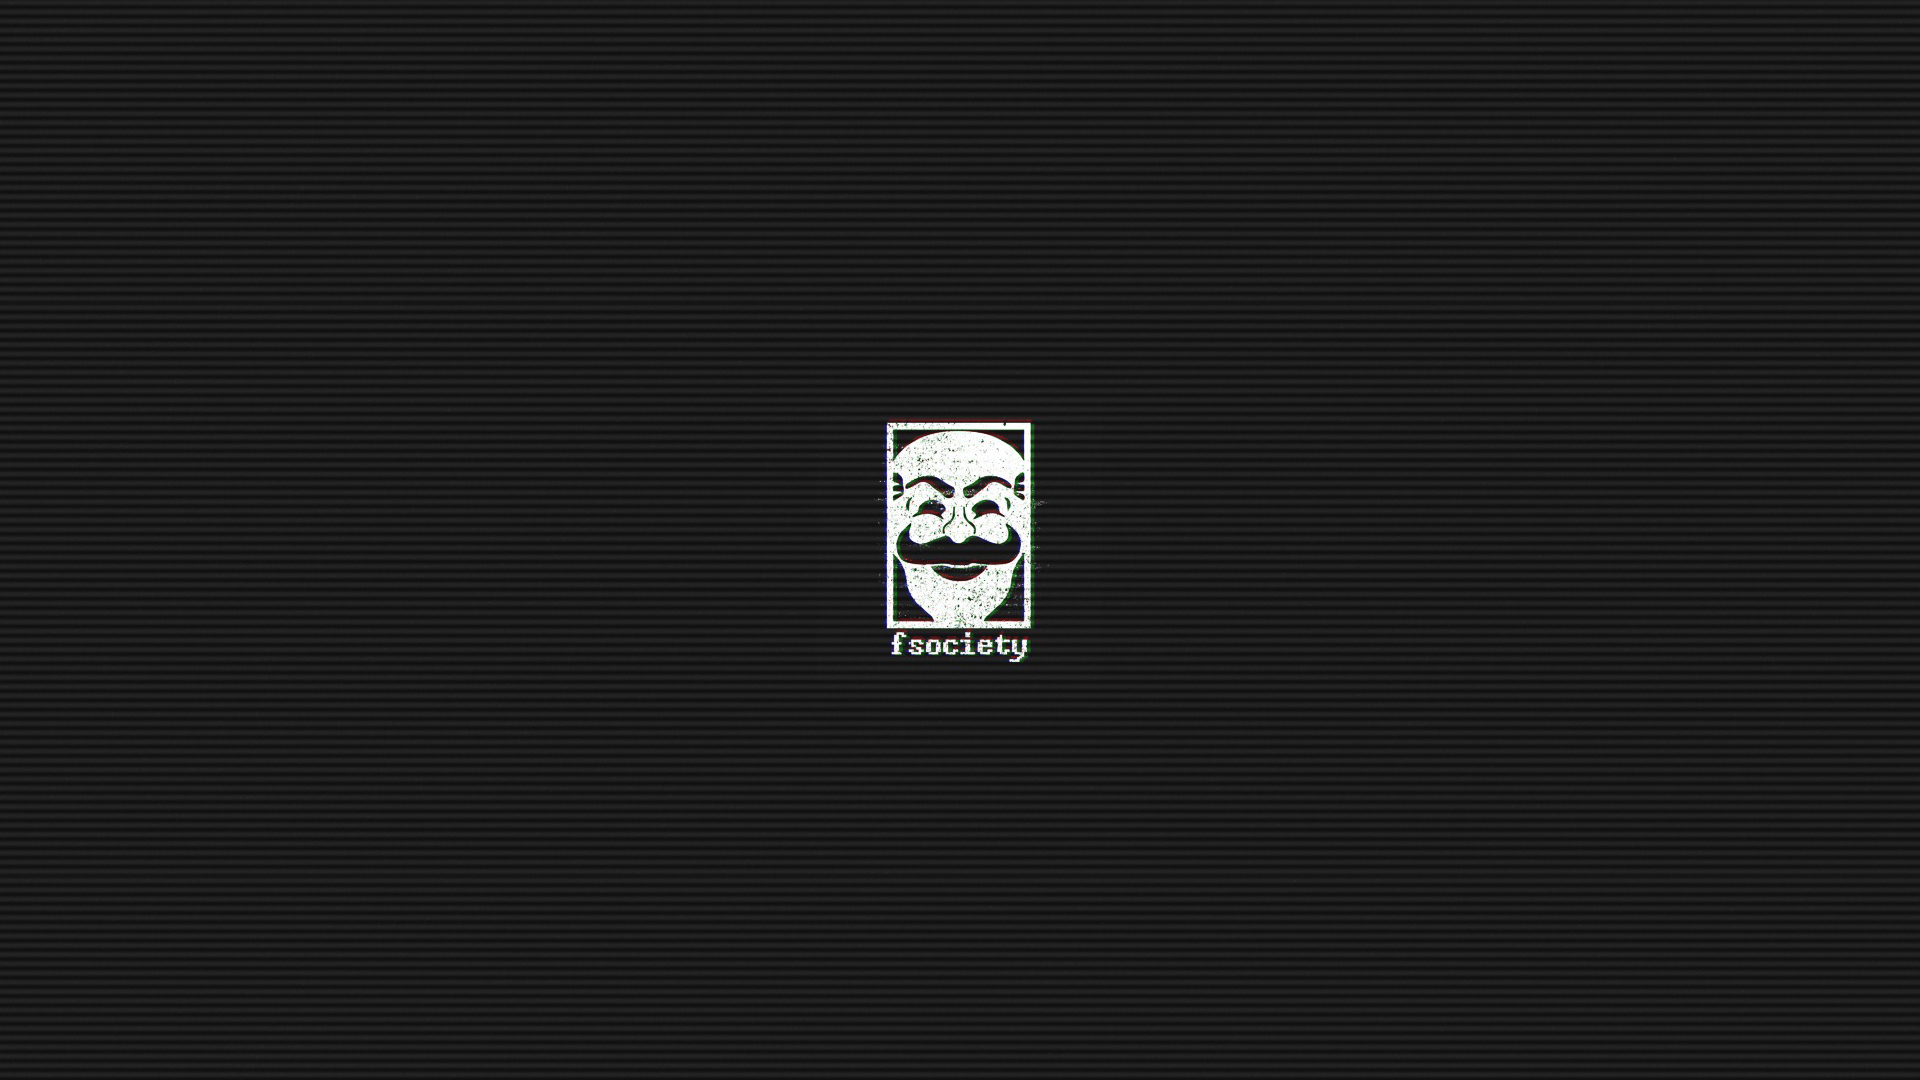 F Society Mr Robot 2, HD Tv Shows, 4k Wallpapers, Images, Backgrounds,  Photos and Pictures